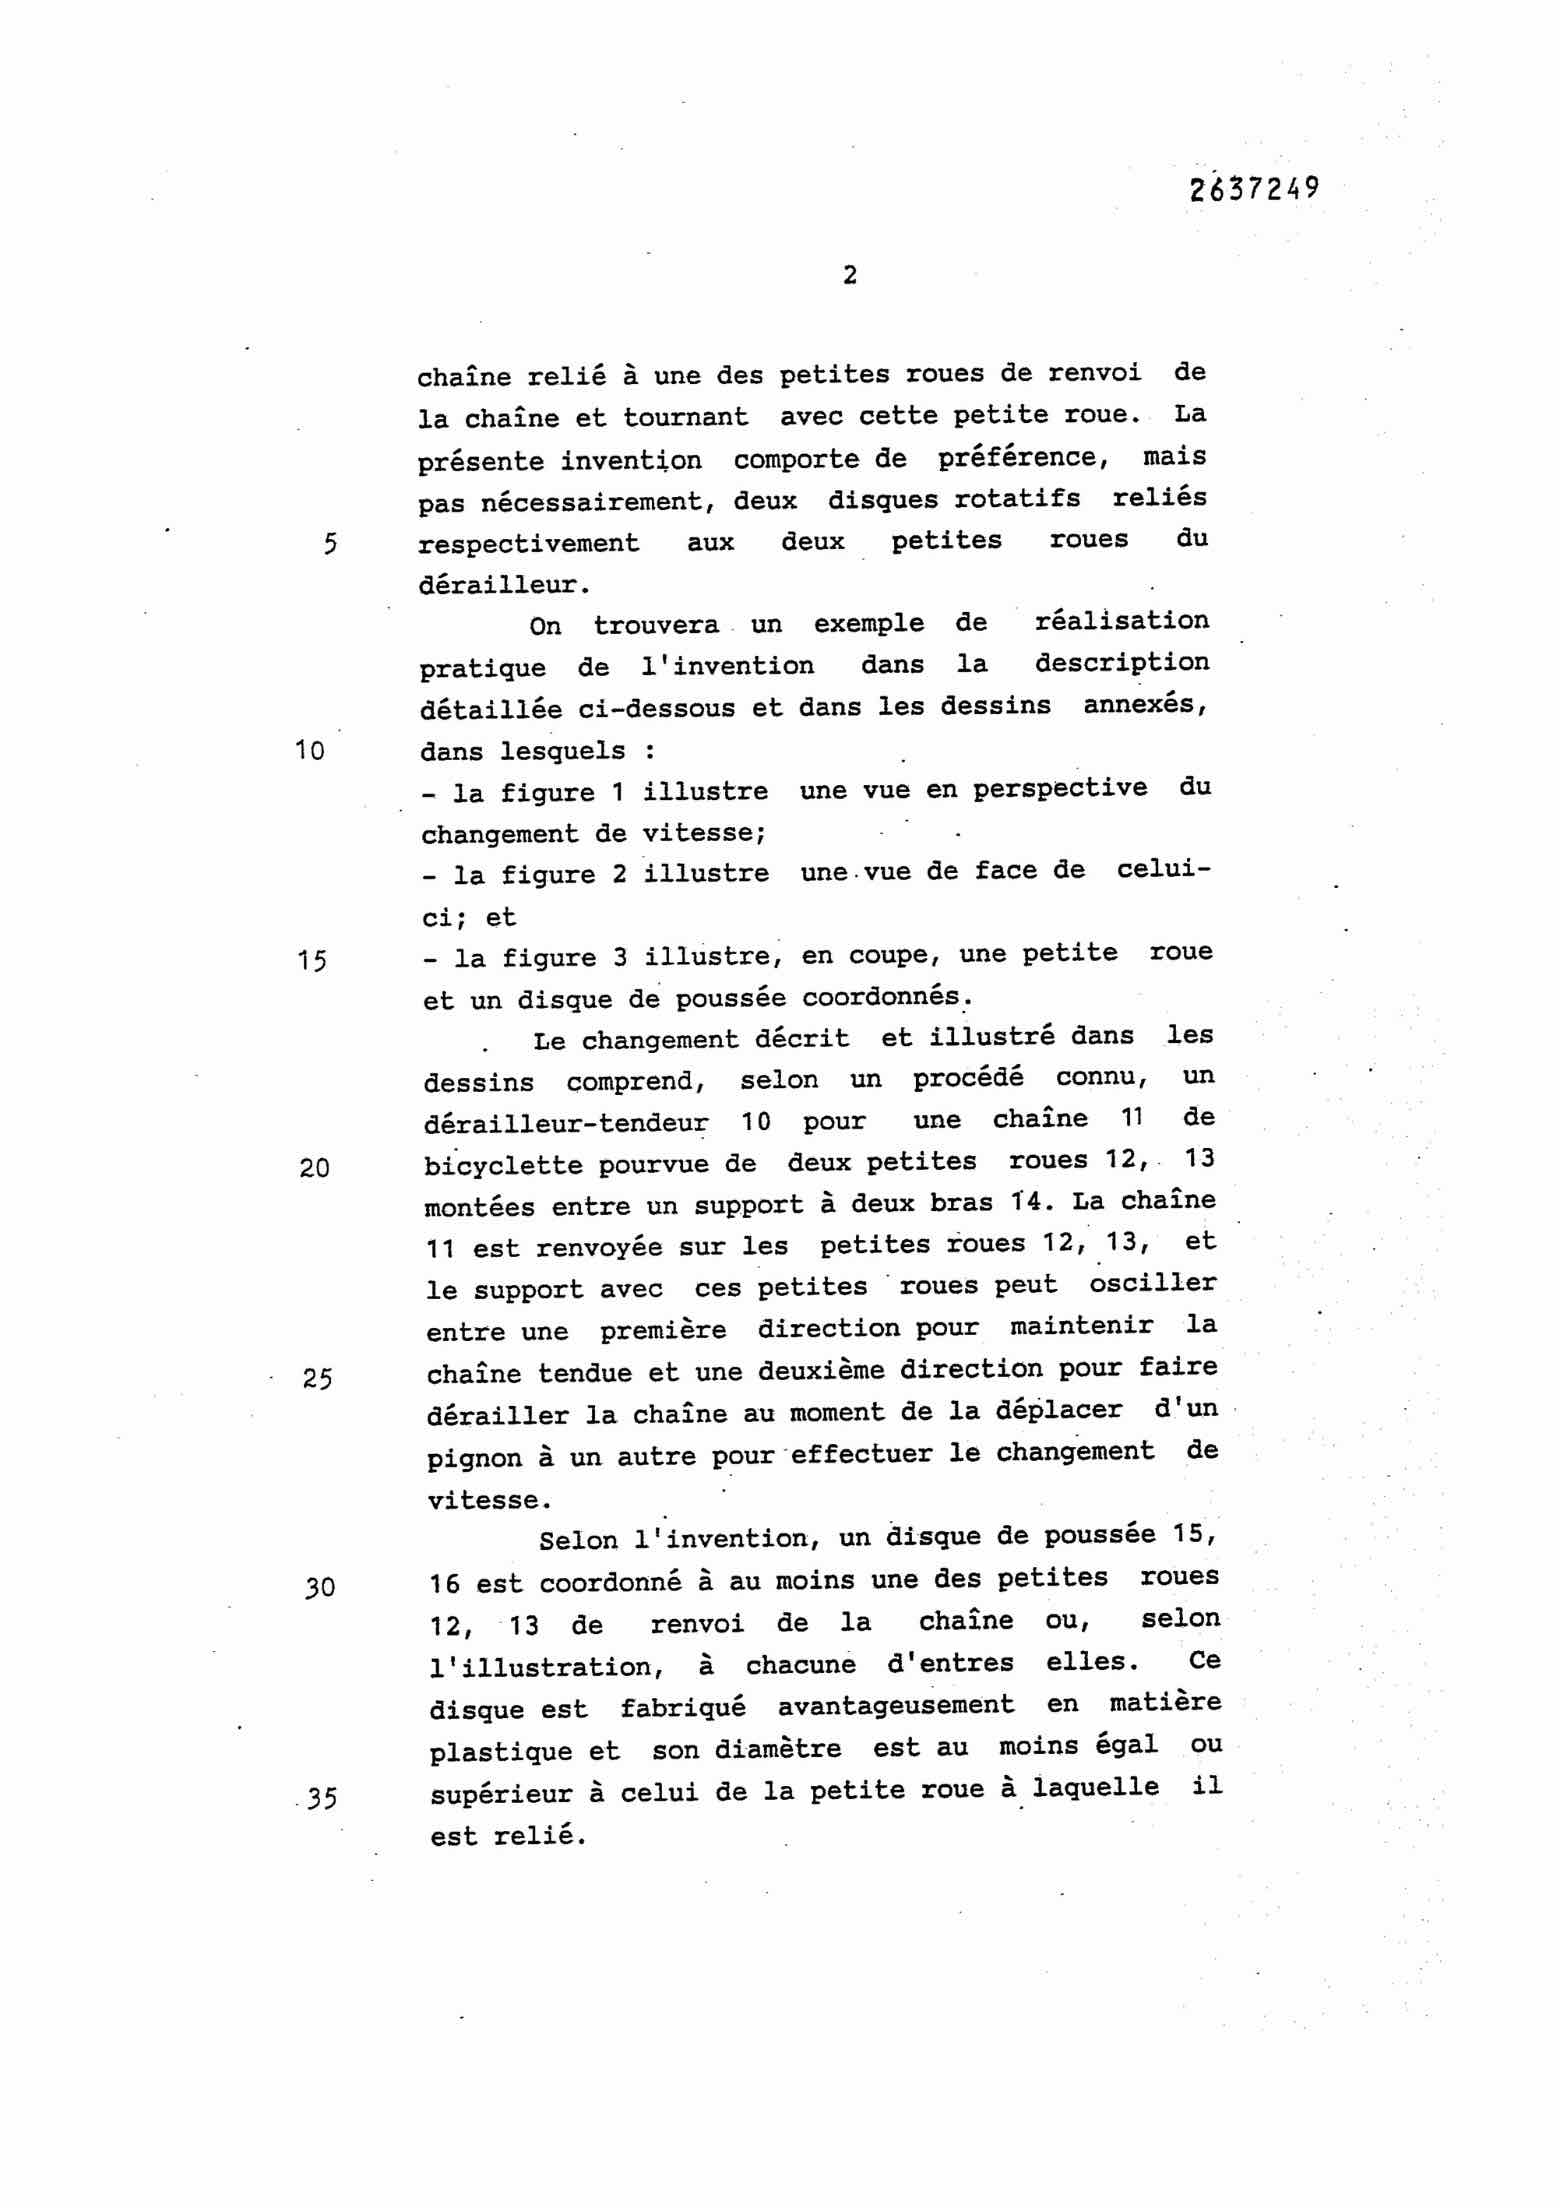 French Patent 2,637,249 - Ofmega Scout scan 3 main image